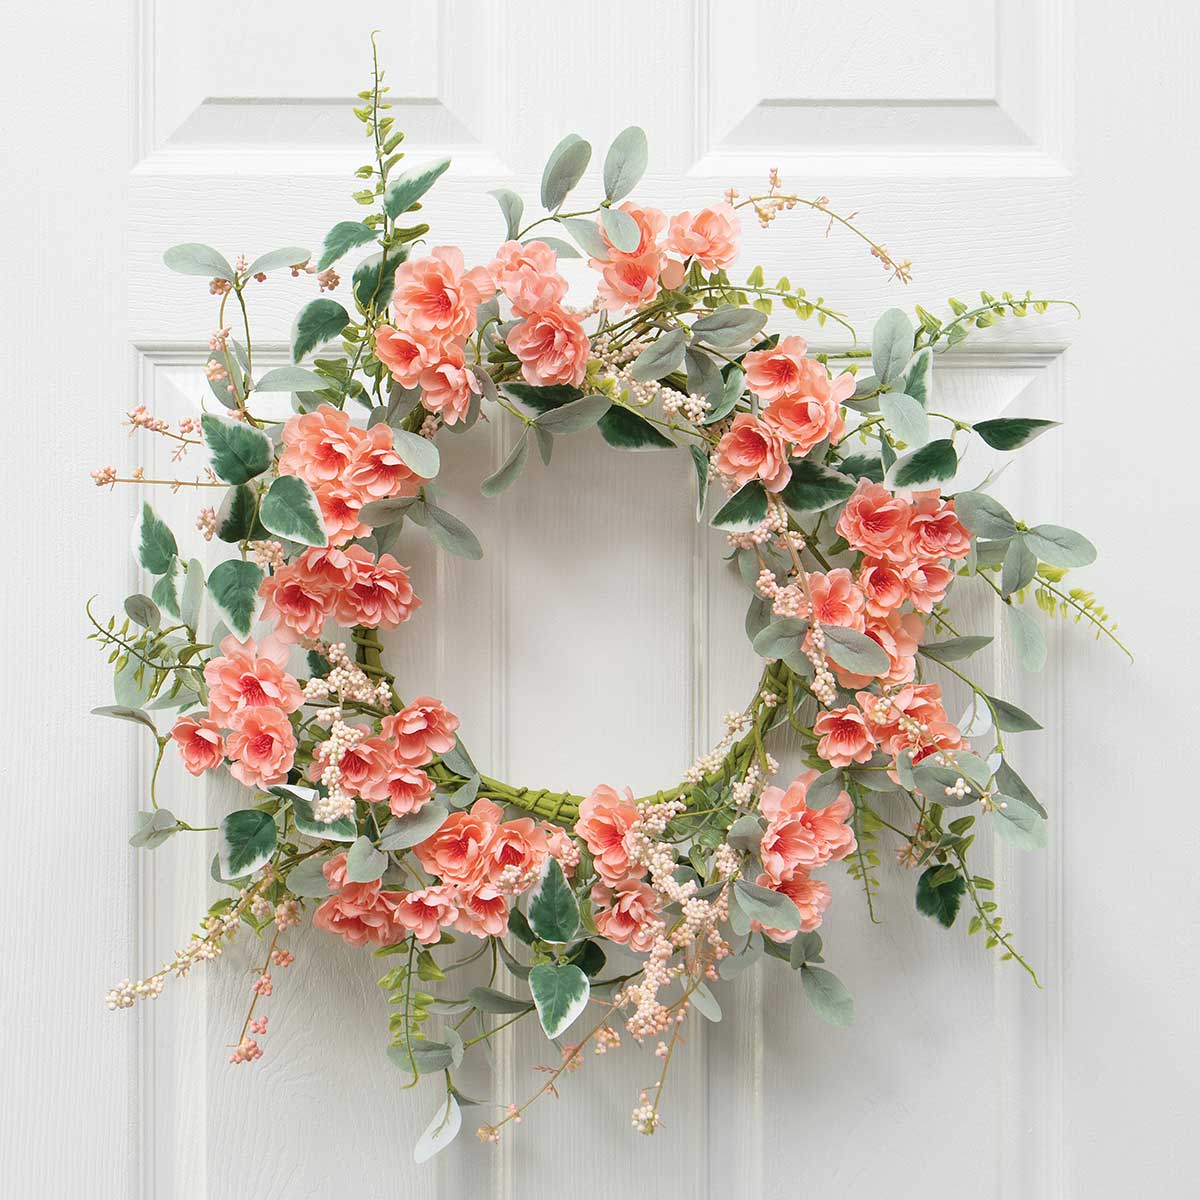 Blossom Mixed Foliage Wreath with Berries Apricot